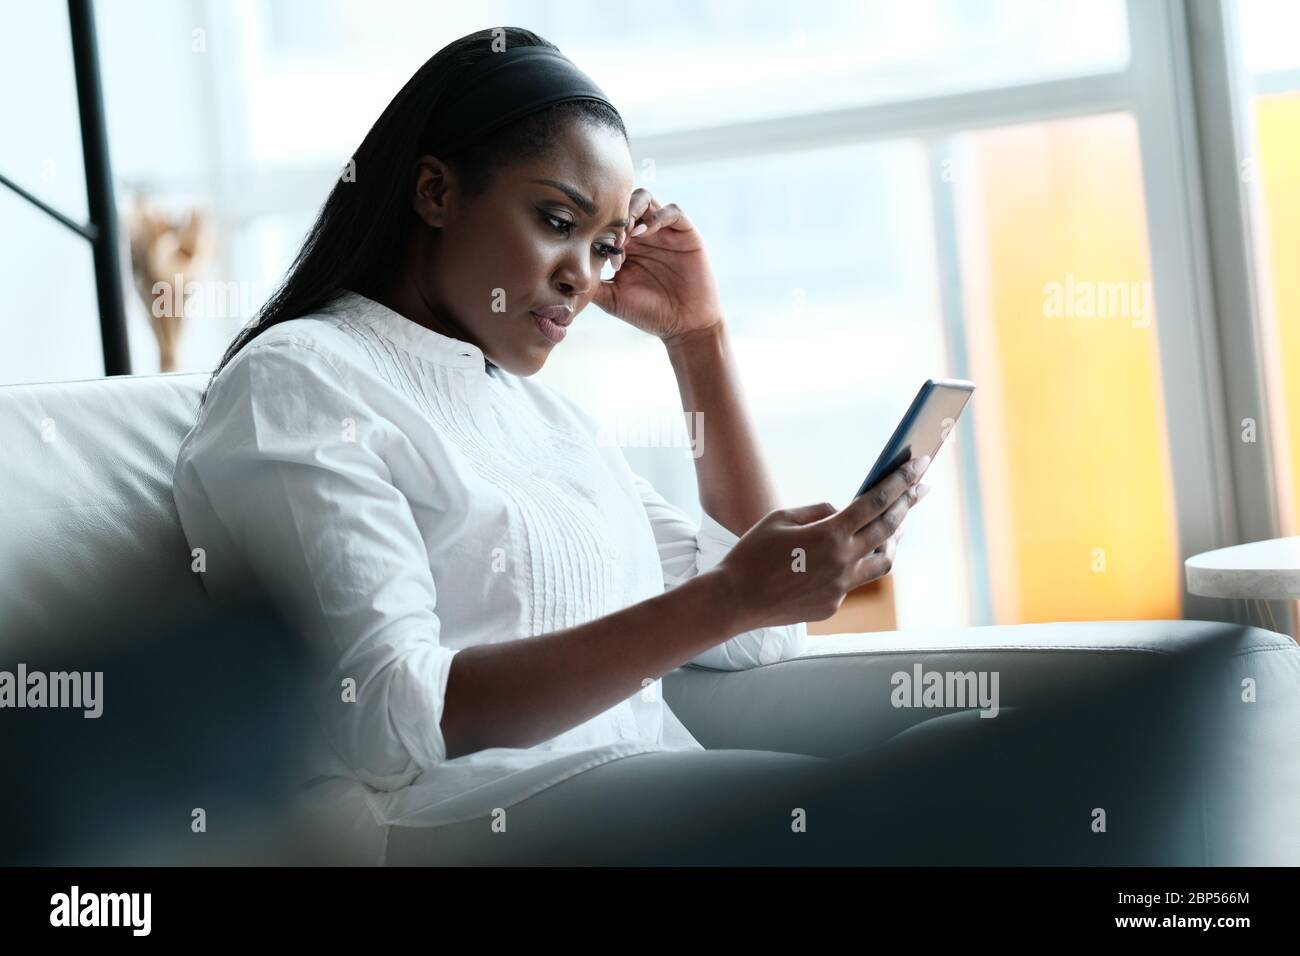 Frustrated Black Woman Having Problems With Smartphone Stock Photo